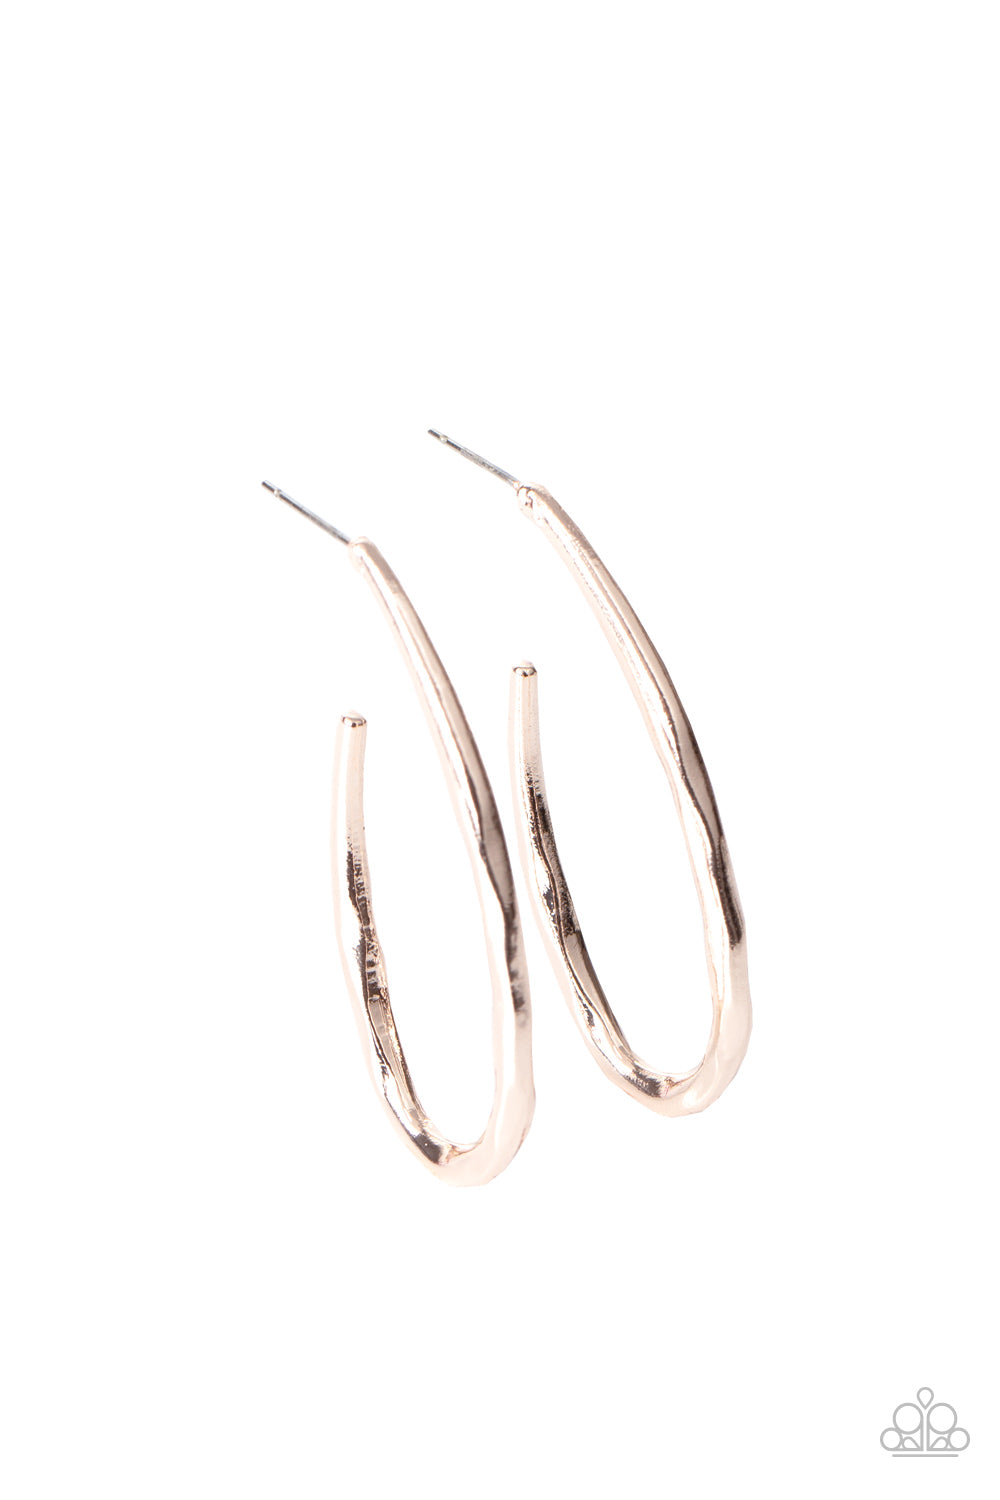 Totally Hooked - Rose Gold Hoop Earrings - Paparazzi Accessories - Delicately hammered in shimmery textures, a rose gold bar curves into an asymmetrical hook-like hoop for an edgy look. Earring attaches to a standard post fitting. Hoop measures approximately 1" in diameter. Sold as one pair of hoop earrings.